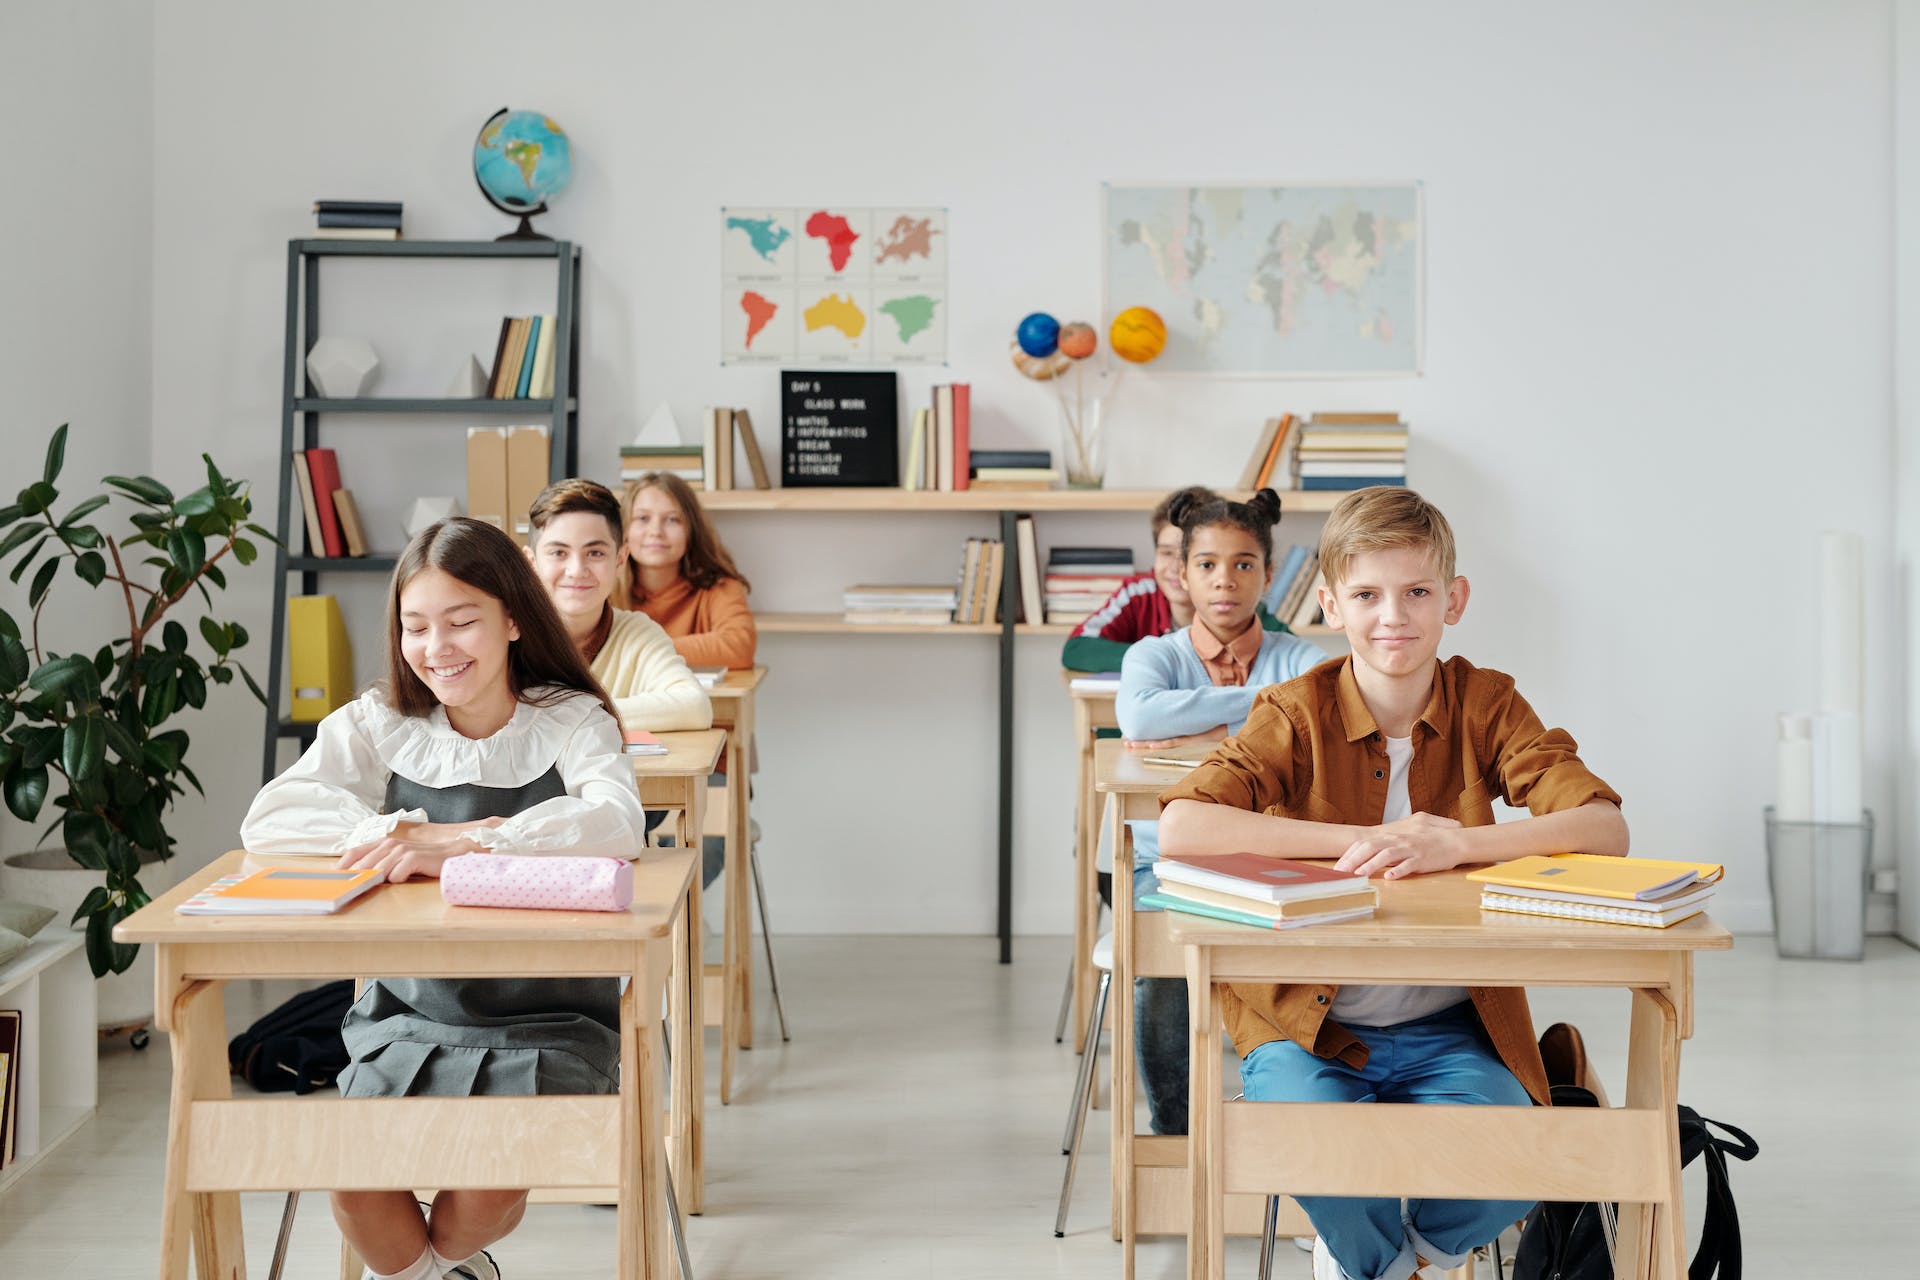 Children sitting in a classroom | Source: Pexels